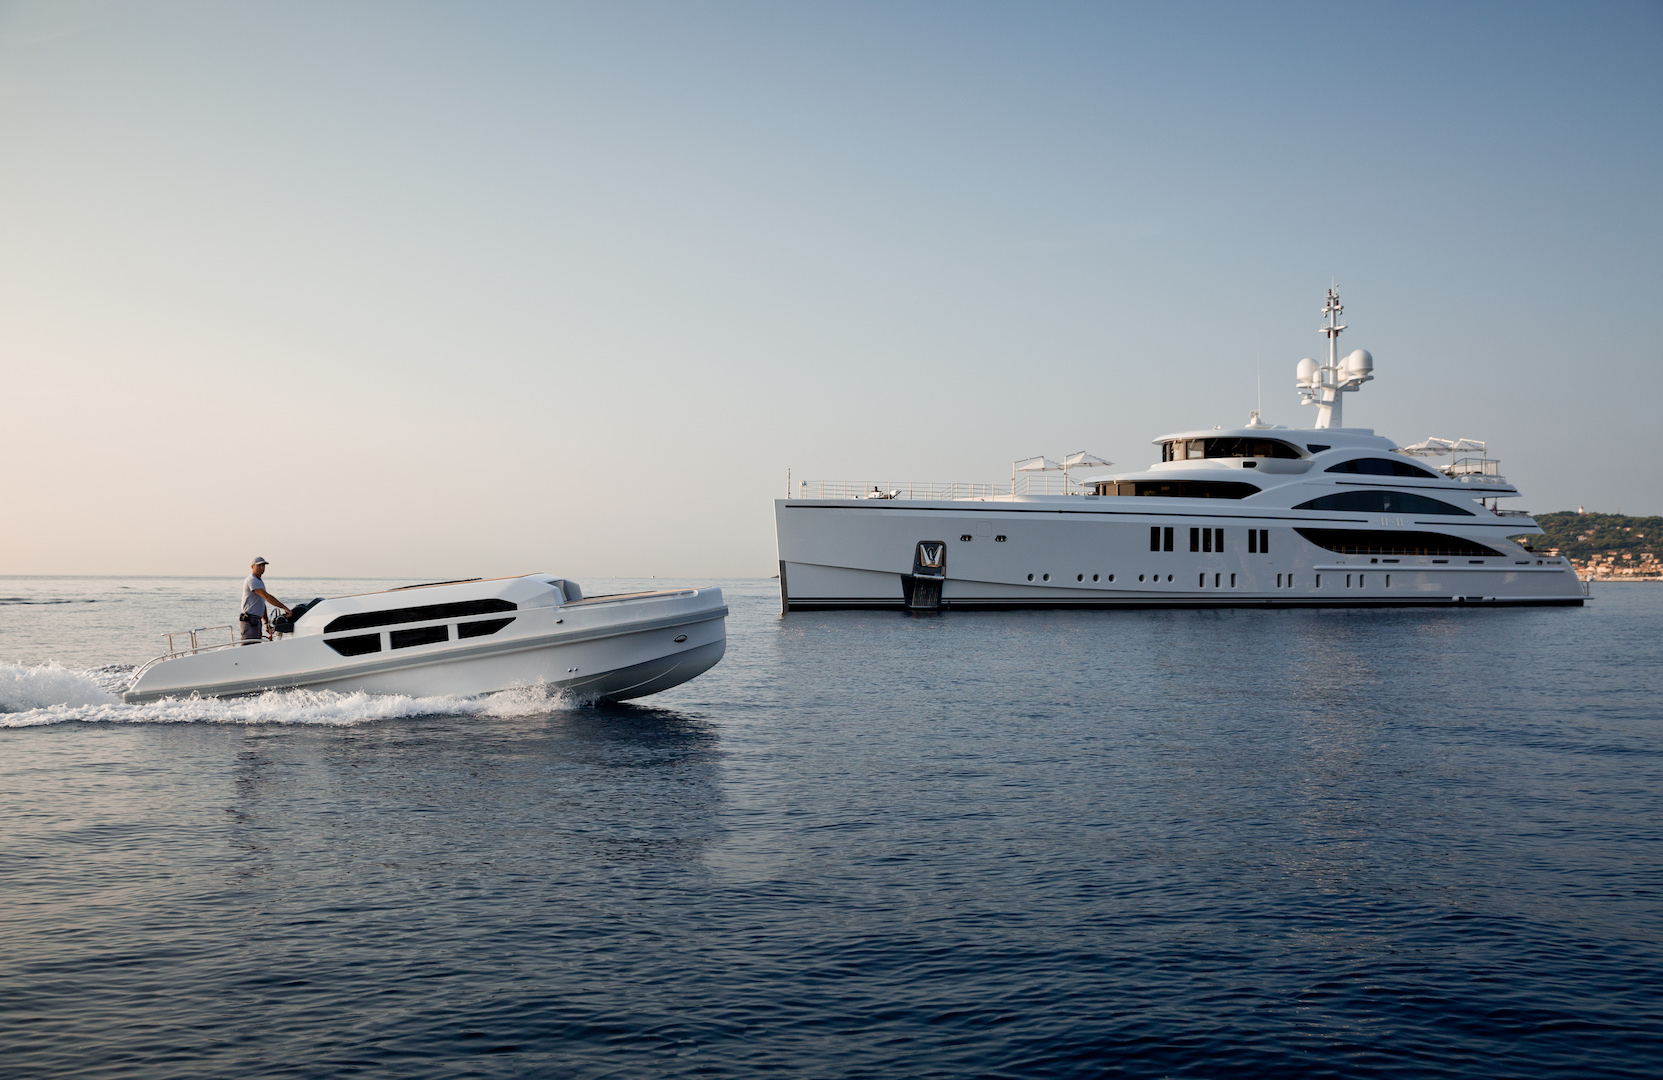 profile of the yacht with tender